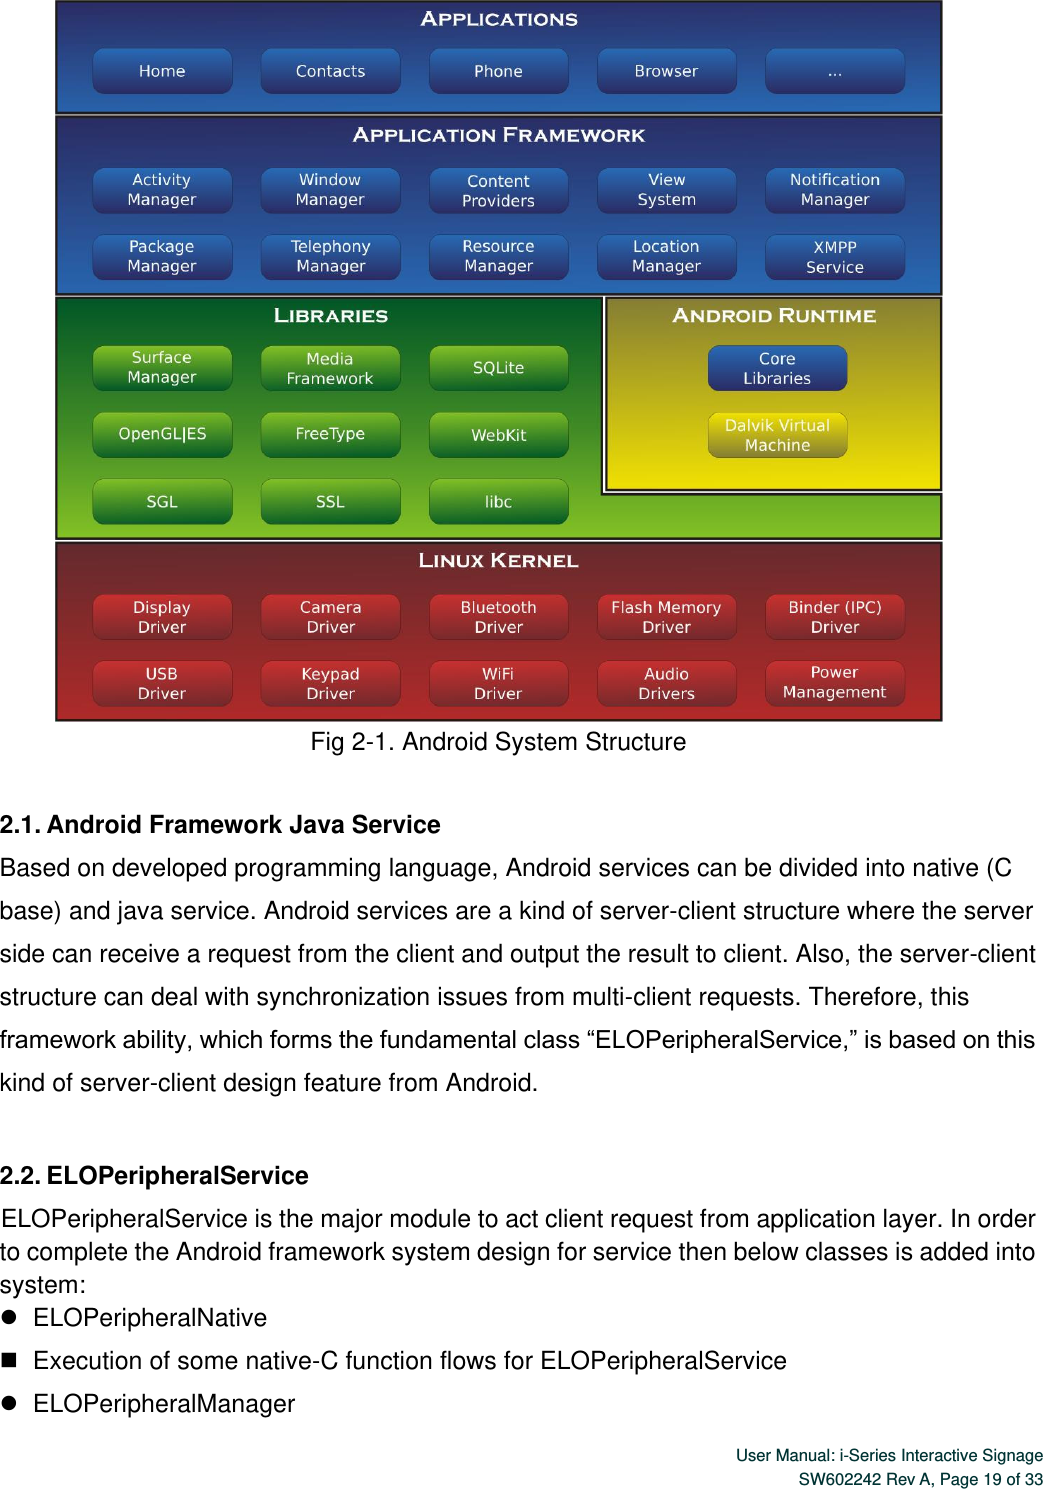  User Manual: i-Series Interactive Signage SW602242 Rev A, Page 19 of 33    Fig 2-1. Android System Structure  2.1. Android Framework Java Service Based on developed programming language, Android services can be divided into native (C base) and java service. Android services are a kind of server-client structure where the server side can receive a request from the client and output the result to client. Also, the server-client structure can deal with synchronization issues from multi-client requests. Therefore, this framework ability, which forms the fundamental class “ELOPeripheralService,” is based on this kind of server-client design feature from Android.  2.2. ELOPeripheralService ELOPeripheralService is the major module to act client request from application layer. In order to complete the Android framework system design for service then below classes is added into system:    ELOPeripheralNative    Execution of some native-C function flows for ELOPeripheralService    ELOPeripheralManager 